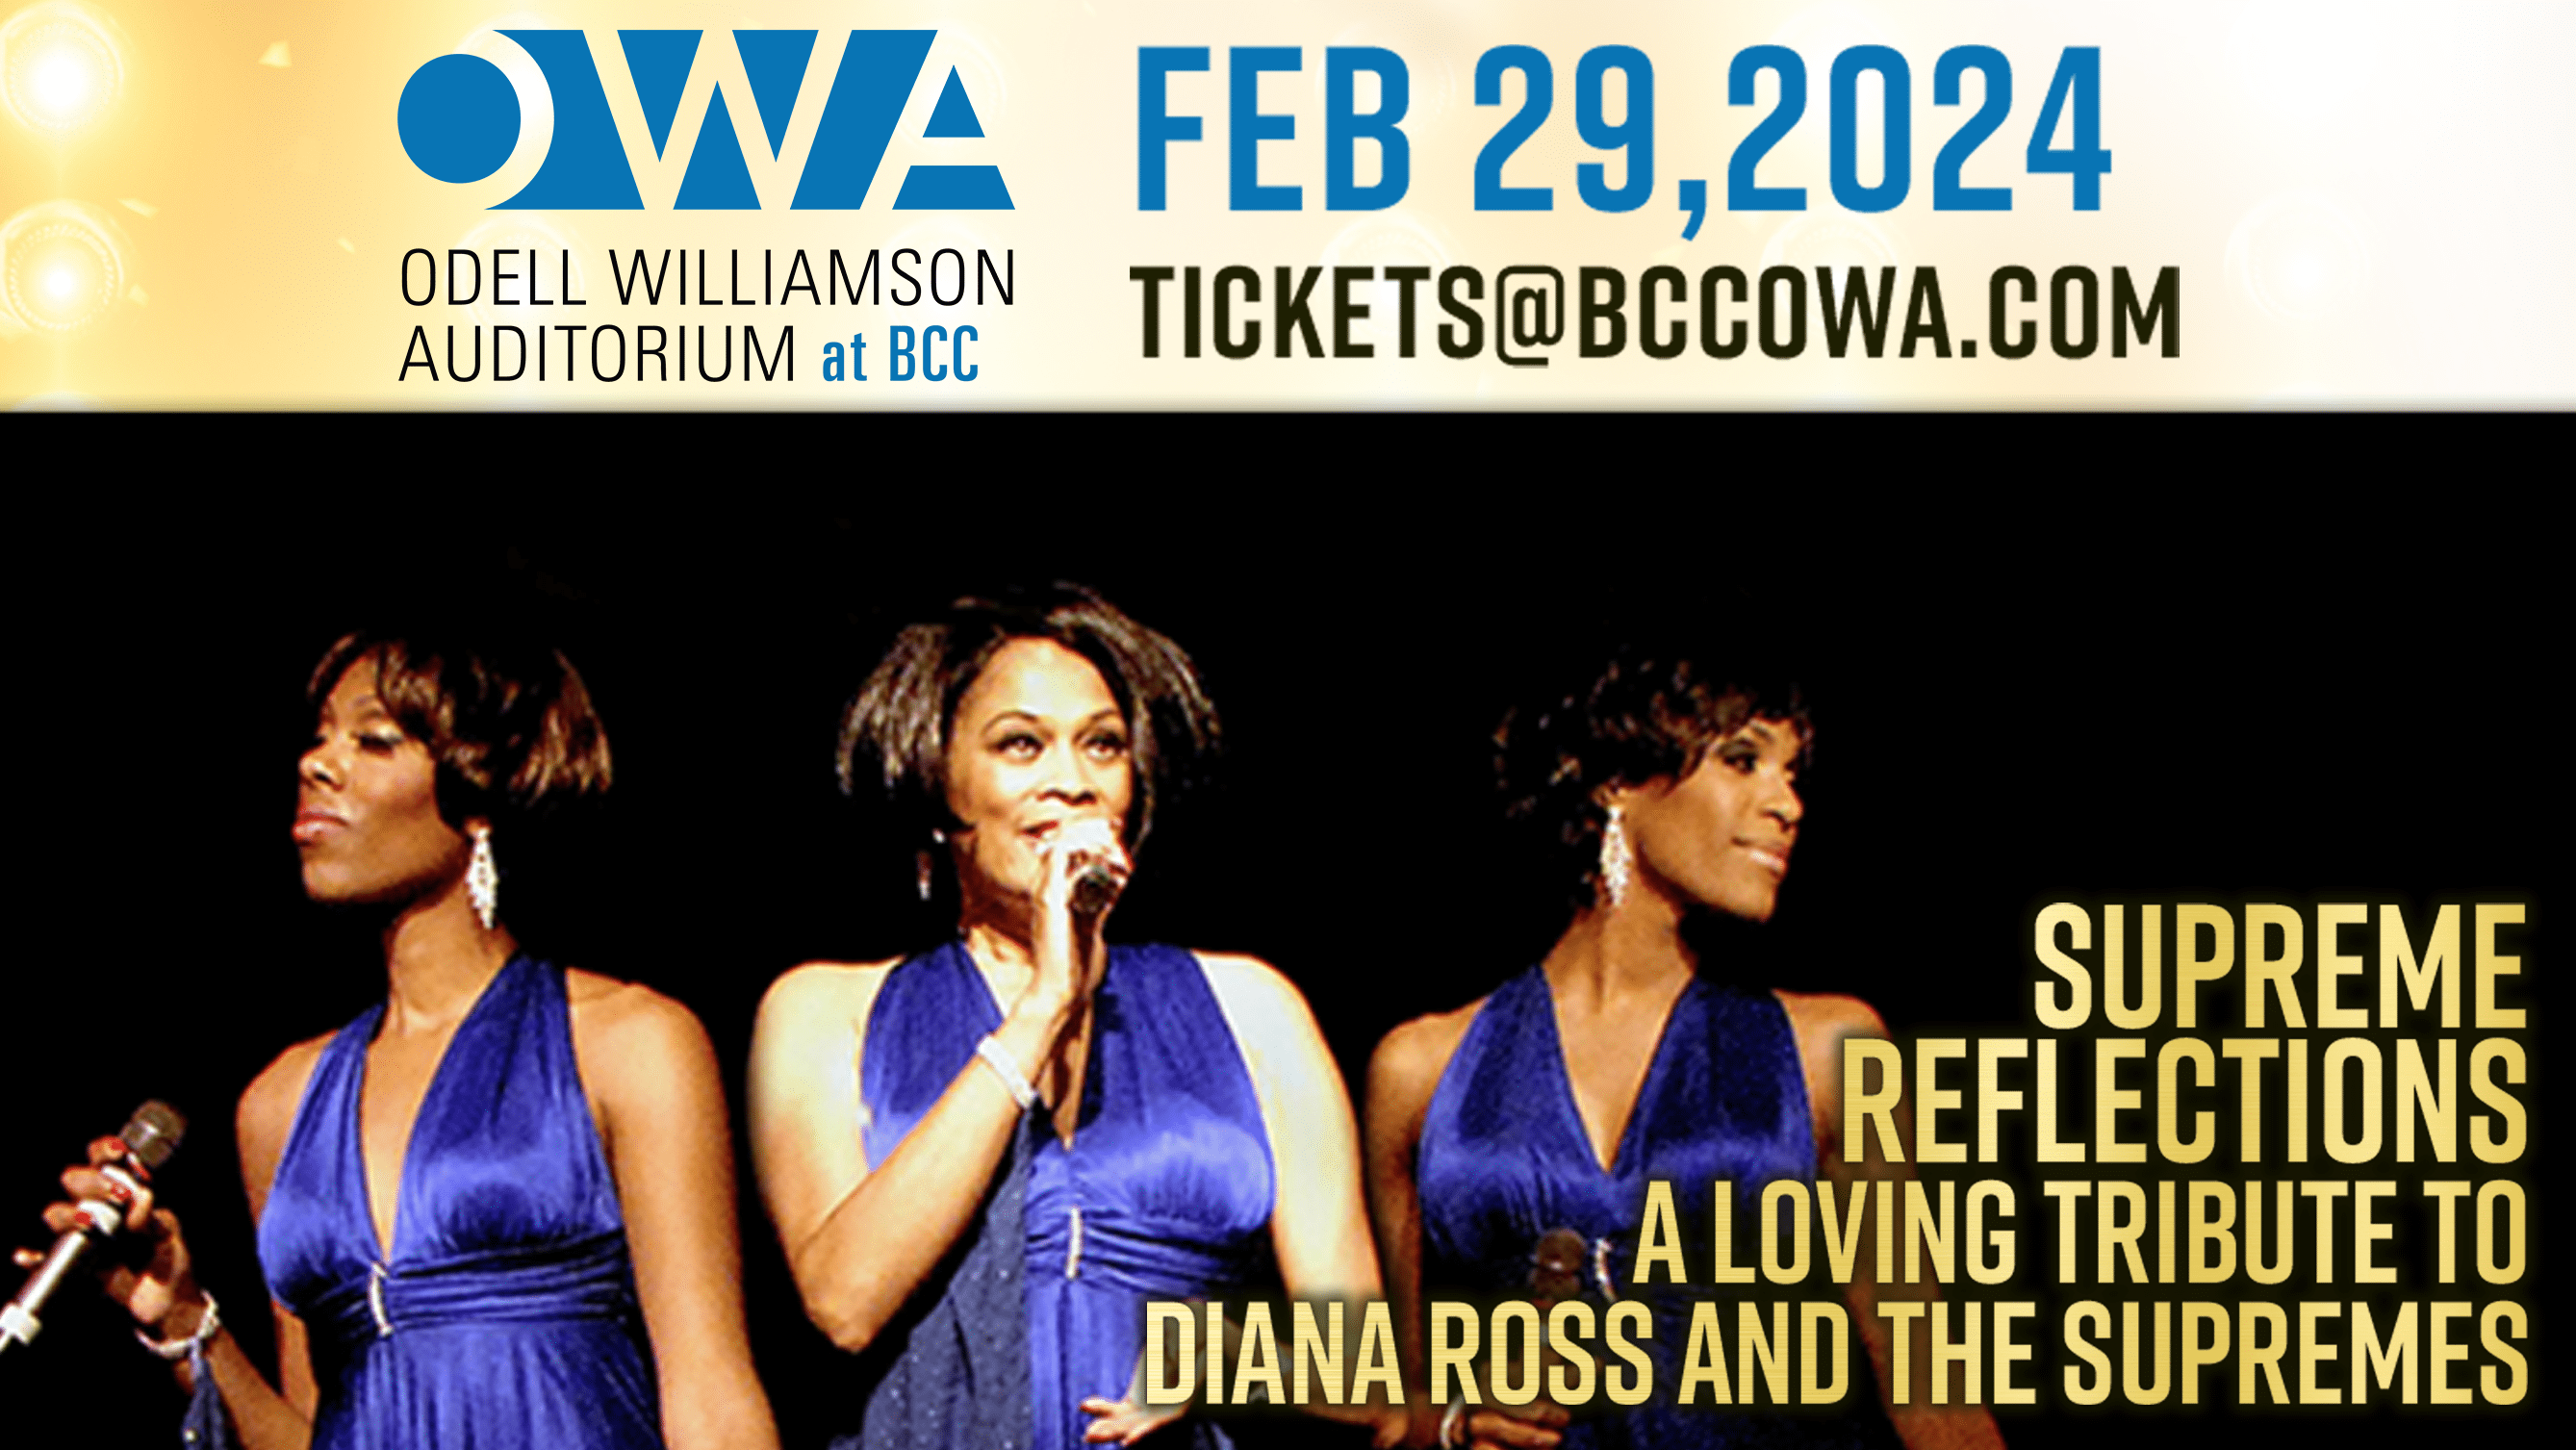 Supreme Reflections - A Tribute to Diana Ross and The Supremes @OWA